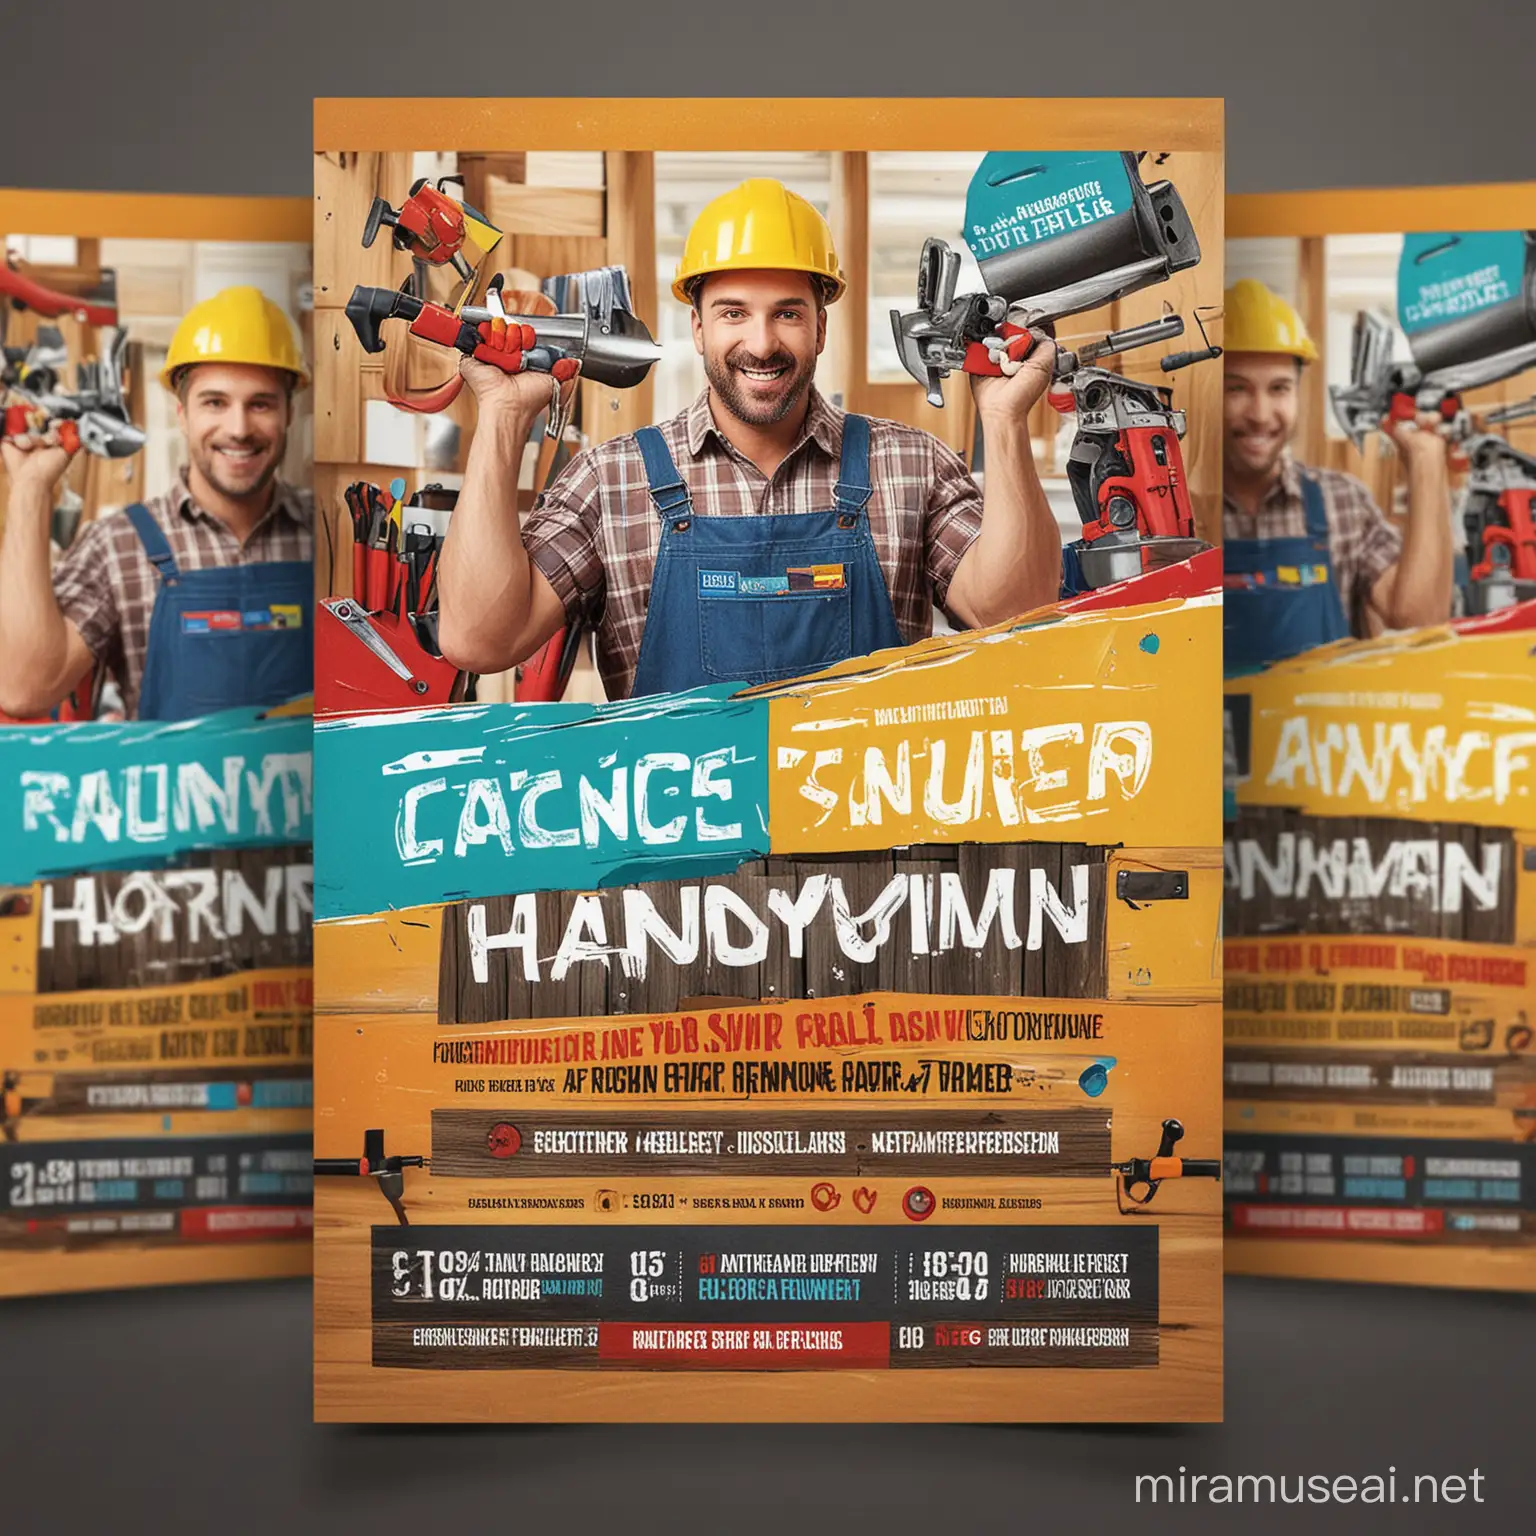 Vibrant Handyman Services Flyer Colorful Fun and EyeCatching Template